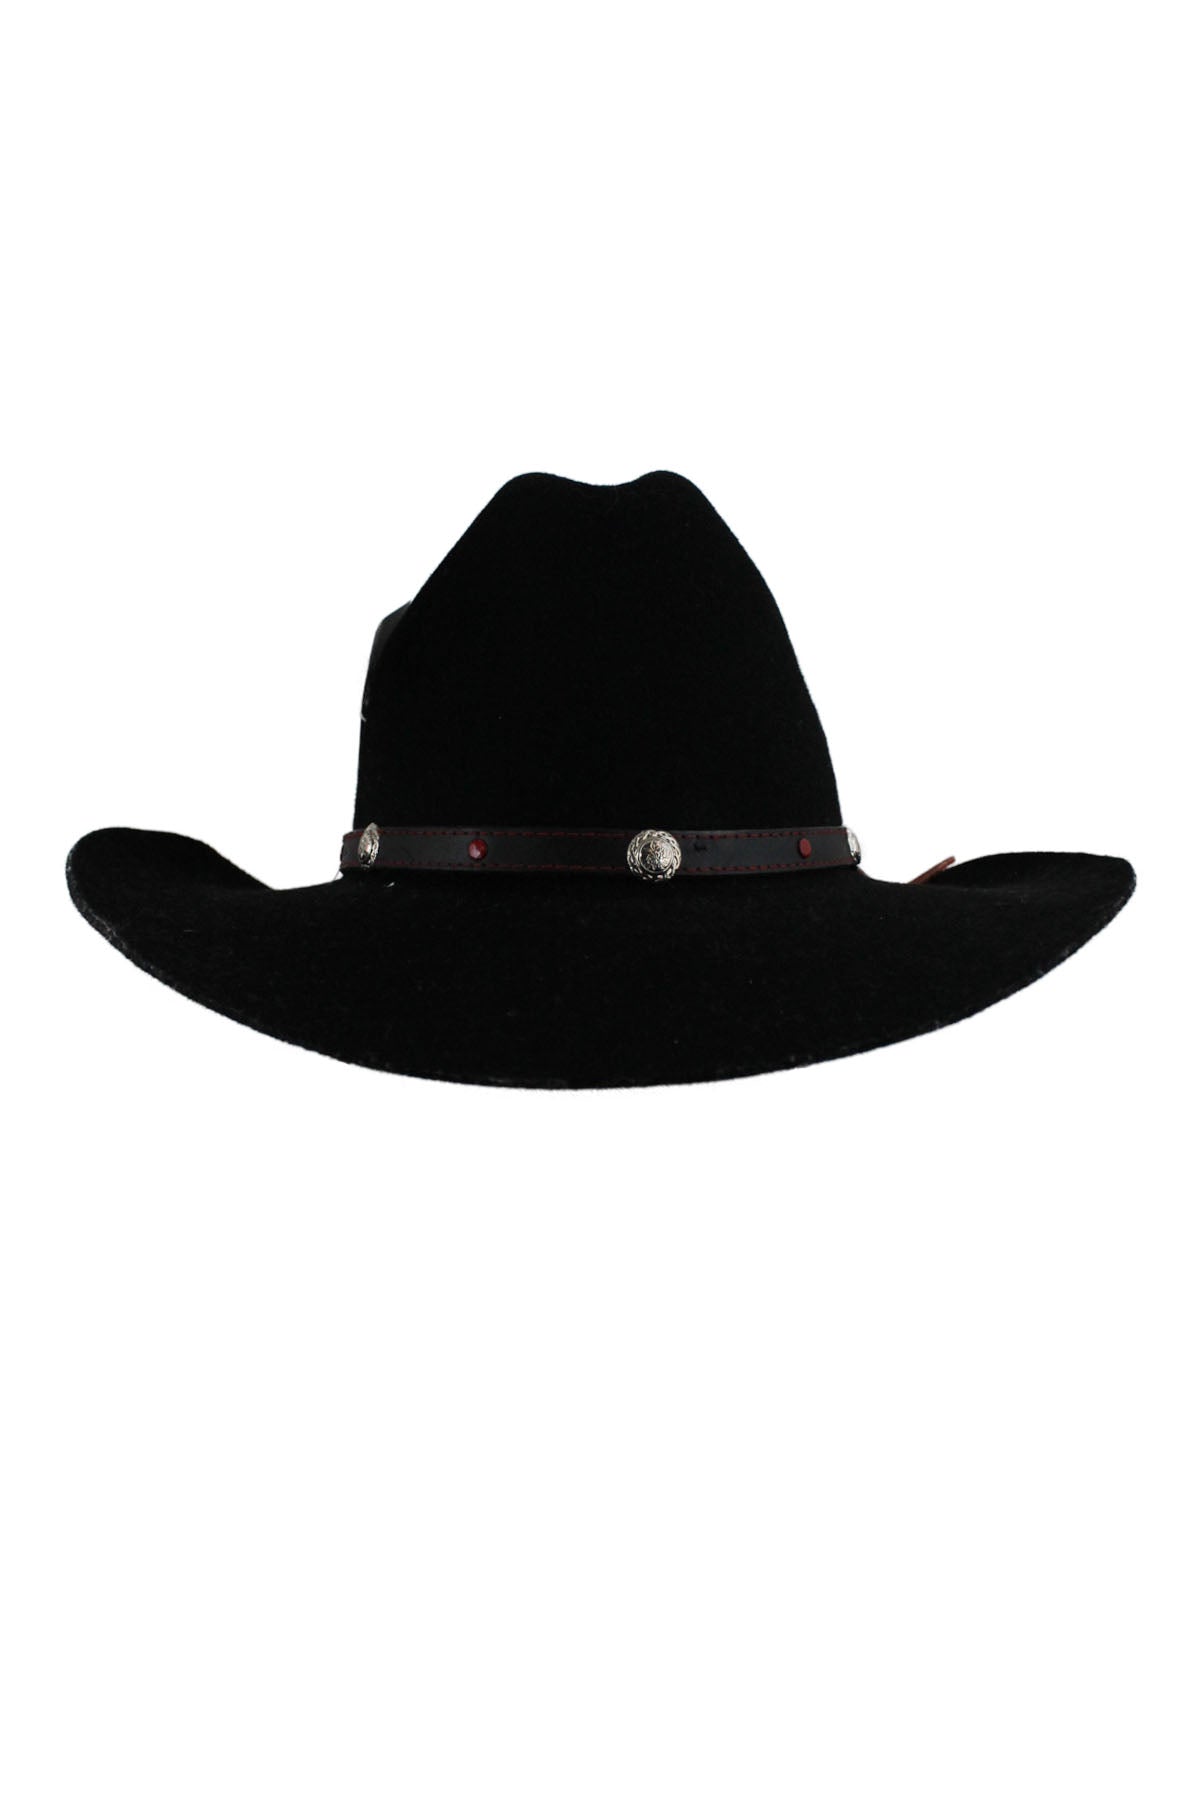 front view of lano felt black fur blend cowboy hat. features black leather accent strap around crown, fully lined, adjustable trim strap, and brim measuring ~ 3.5”.